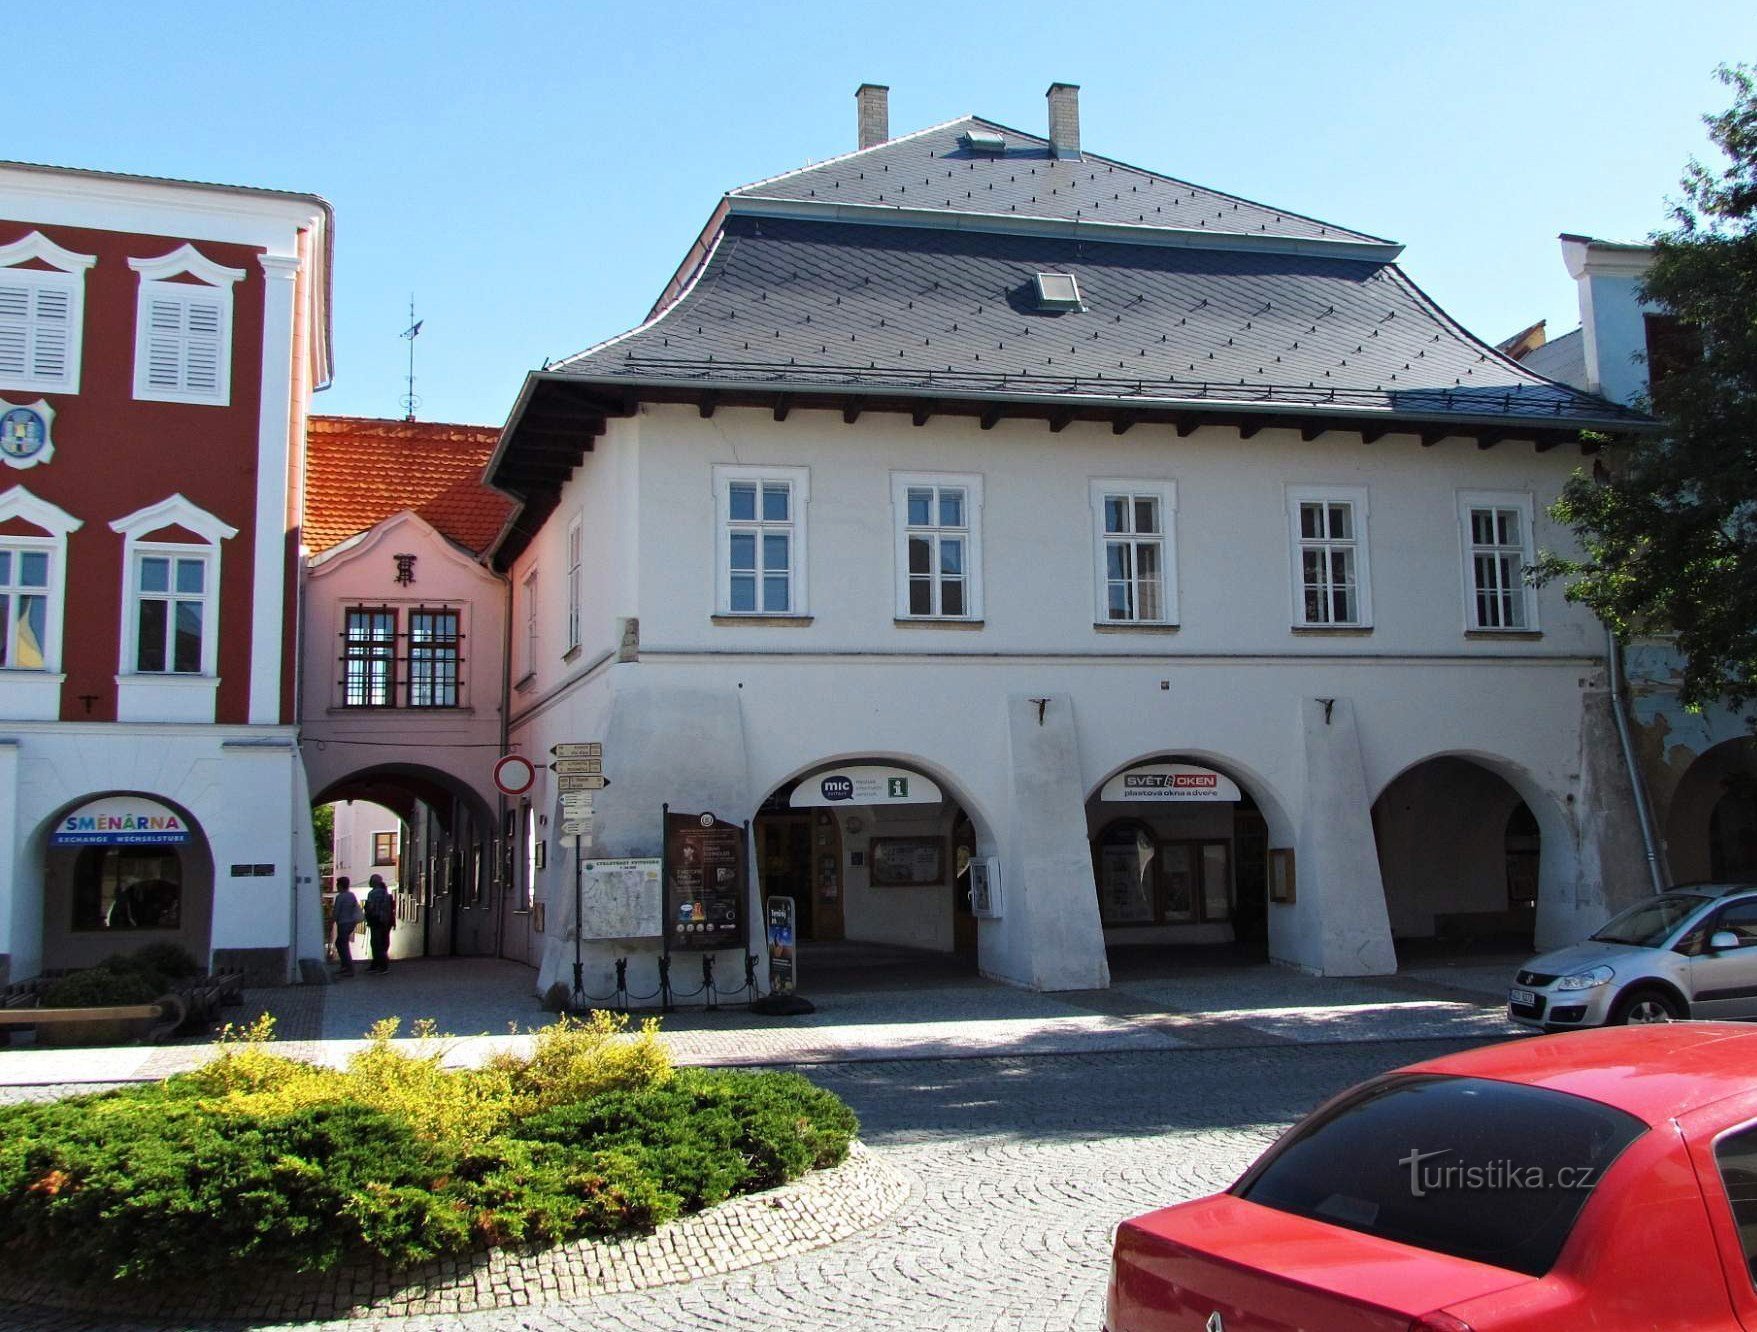 The old town hall and U Mouřenina house on the square in Svitavy